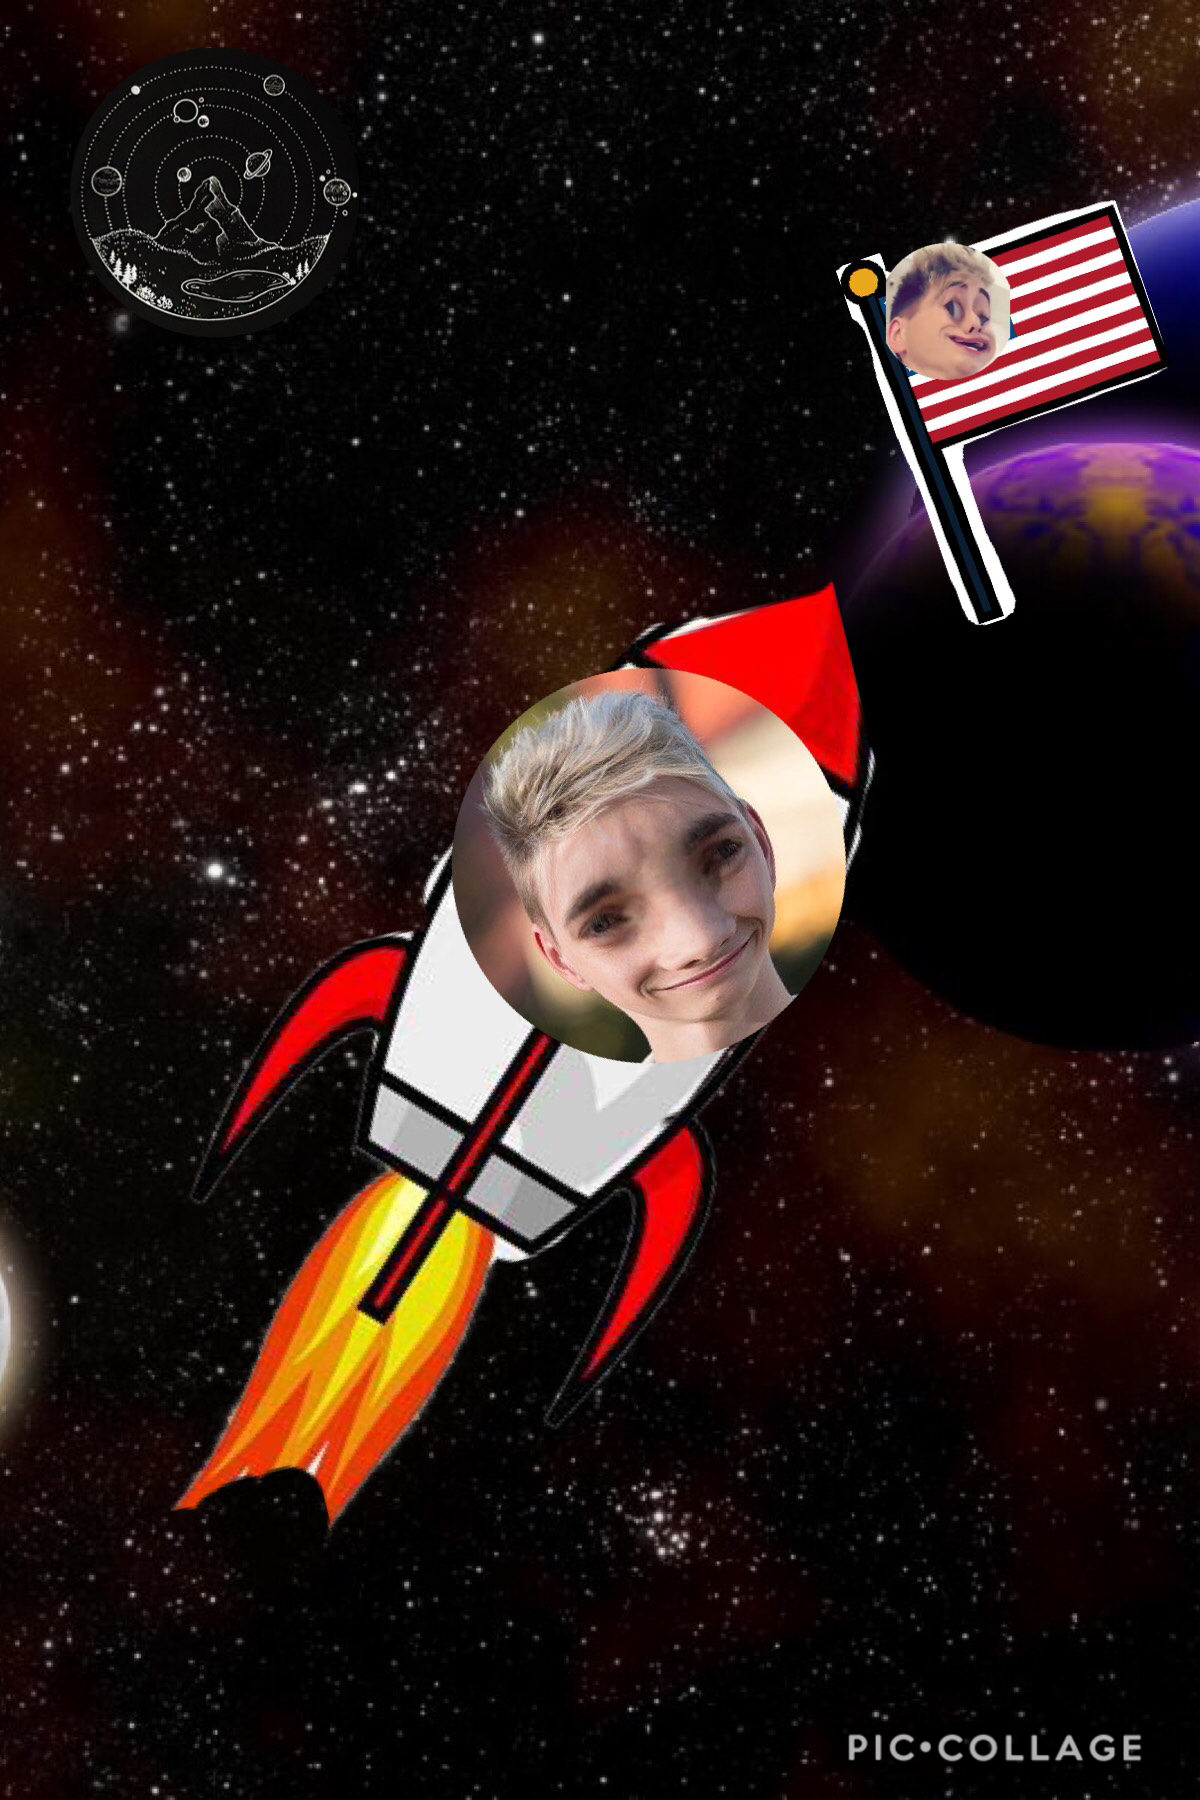 OhMiGoD bEaN iS tHaT yOu?!! 😂
United States of Corbyn Matthew Besson... I’d like to live there😩